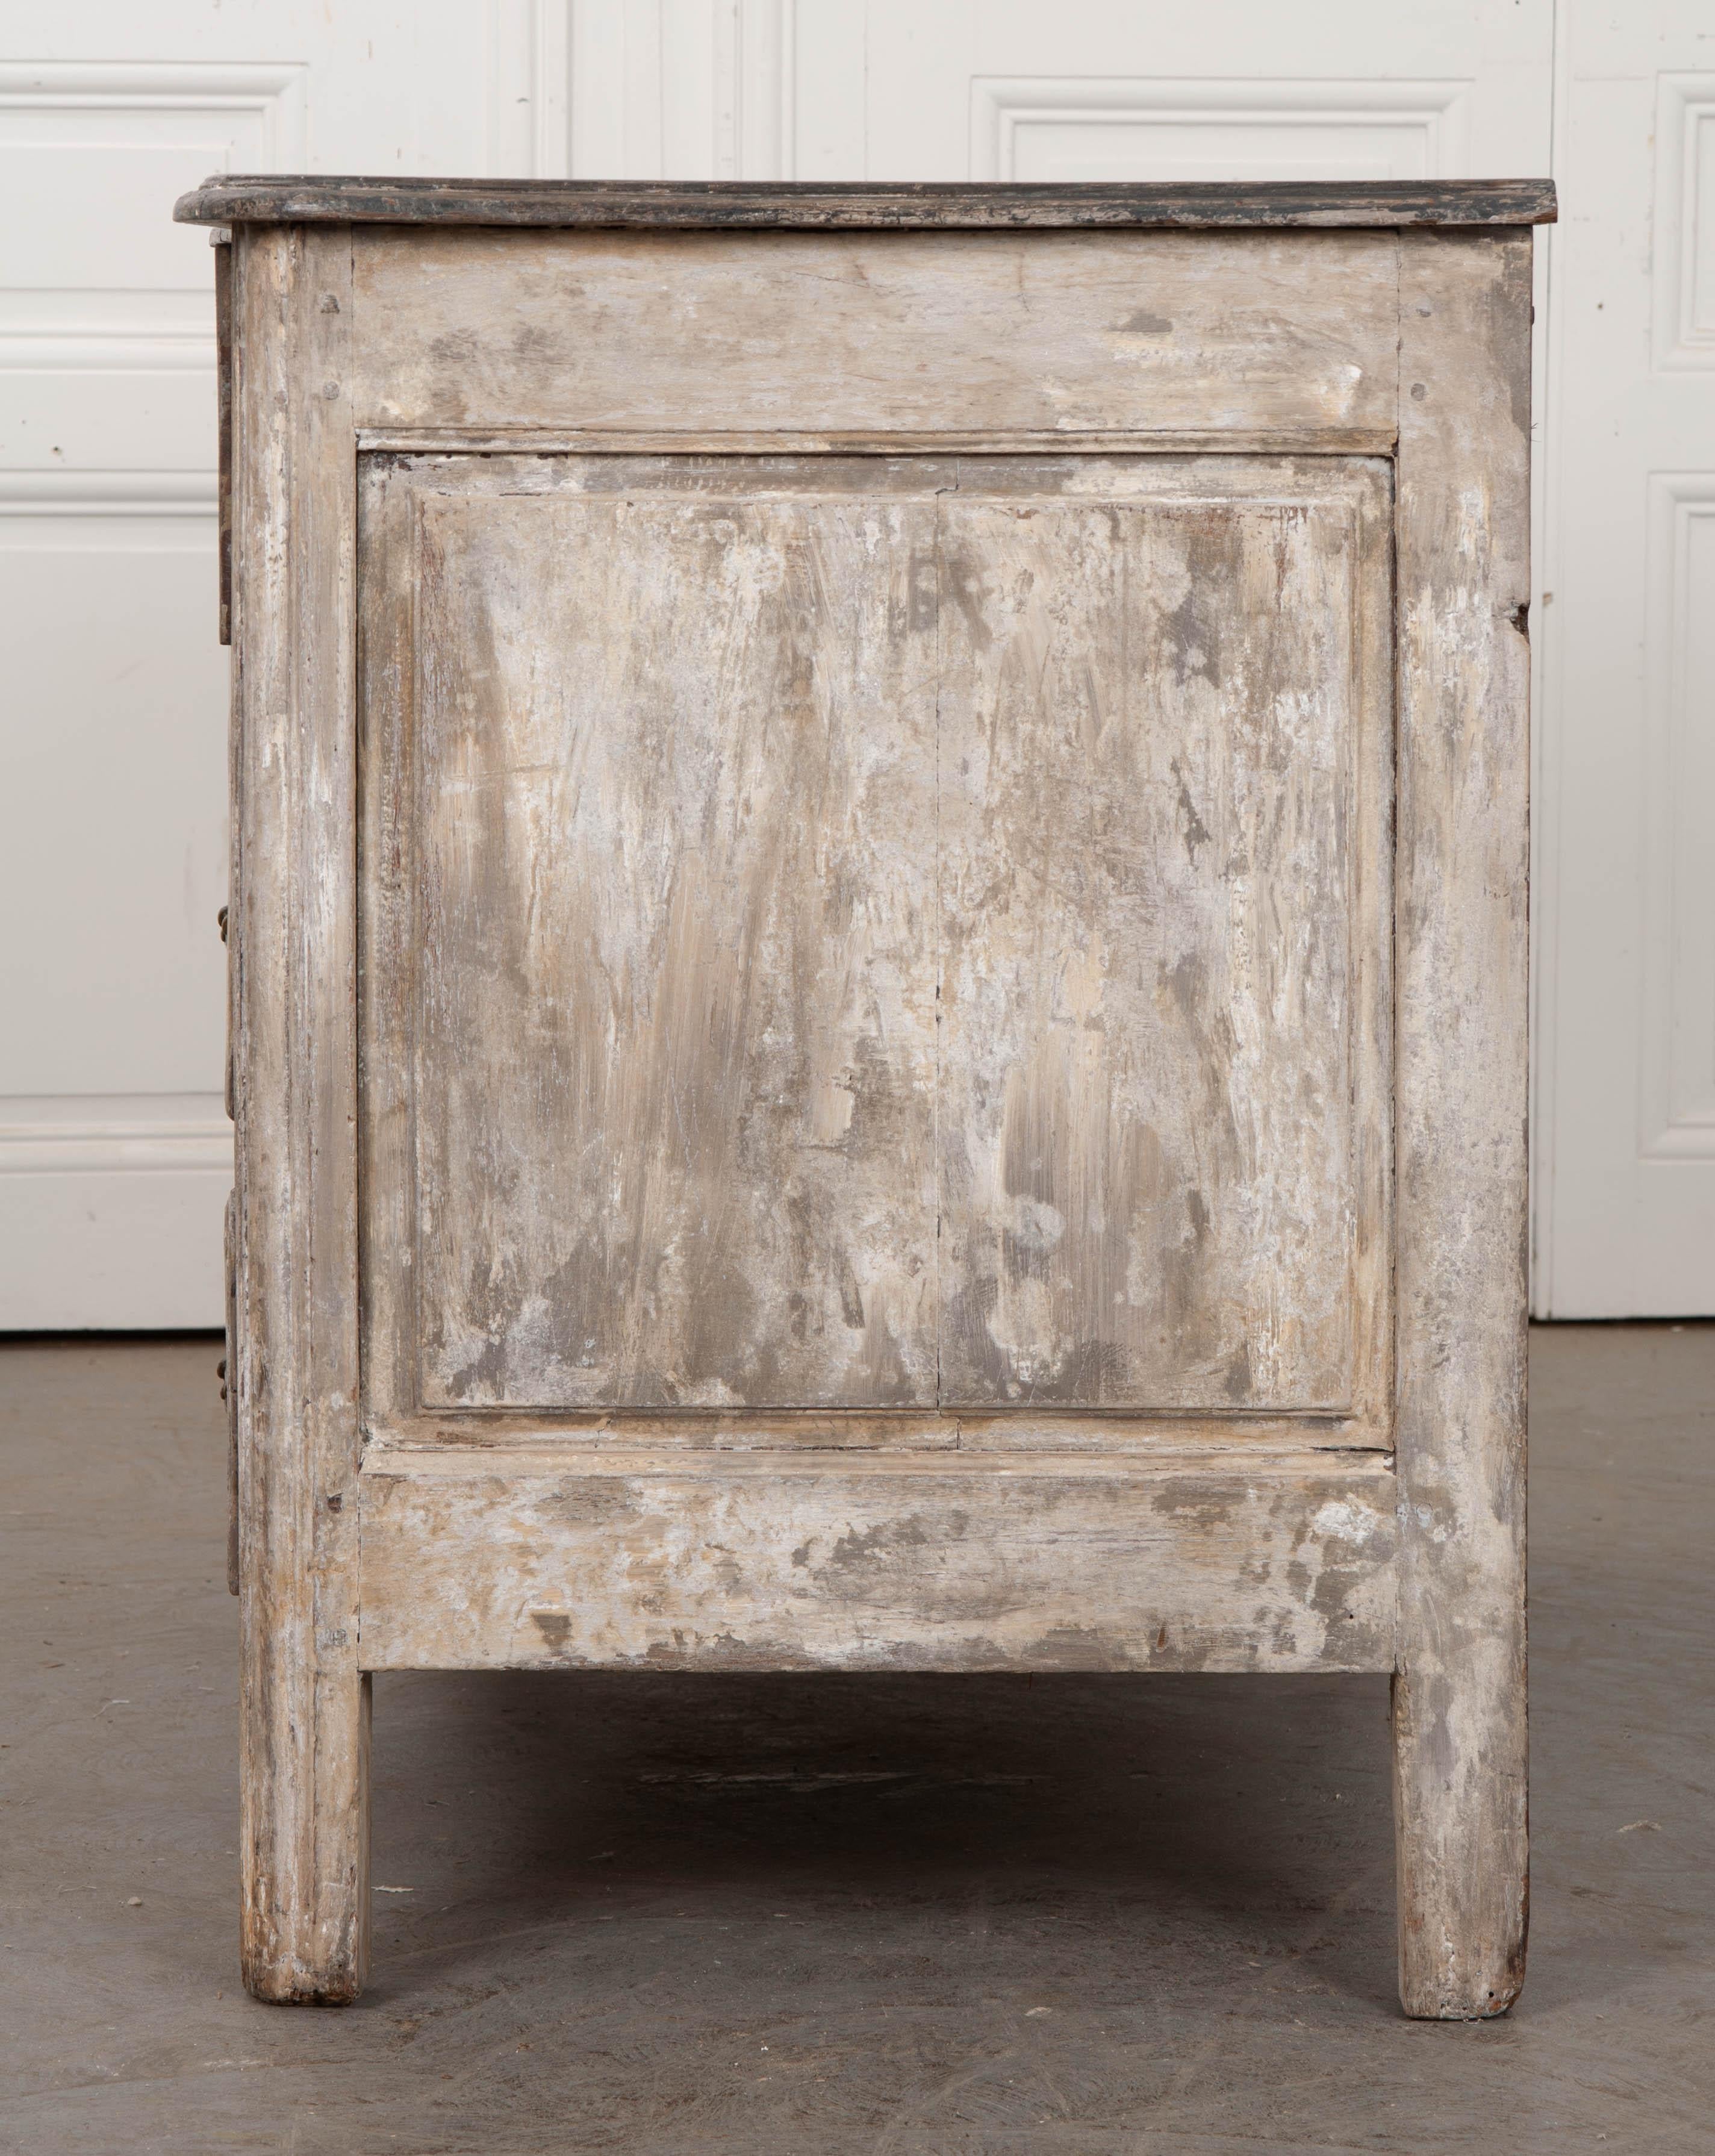 French 18th Century Painted Parisian Commode In Good Condition For Sale In Baton Rouge, LA